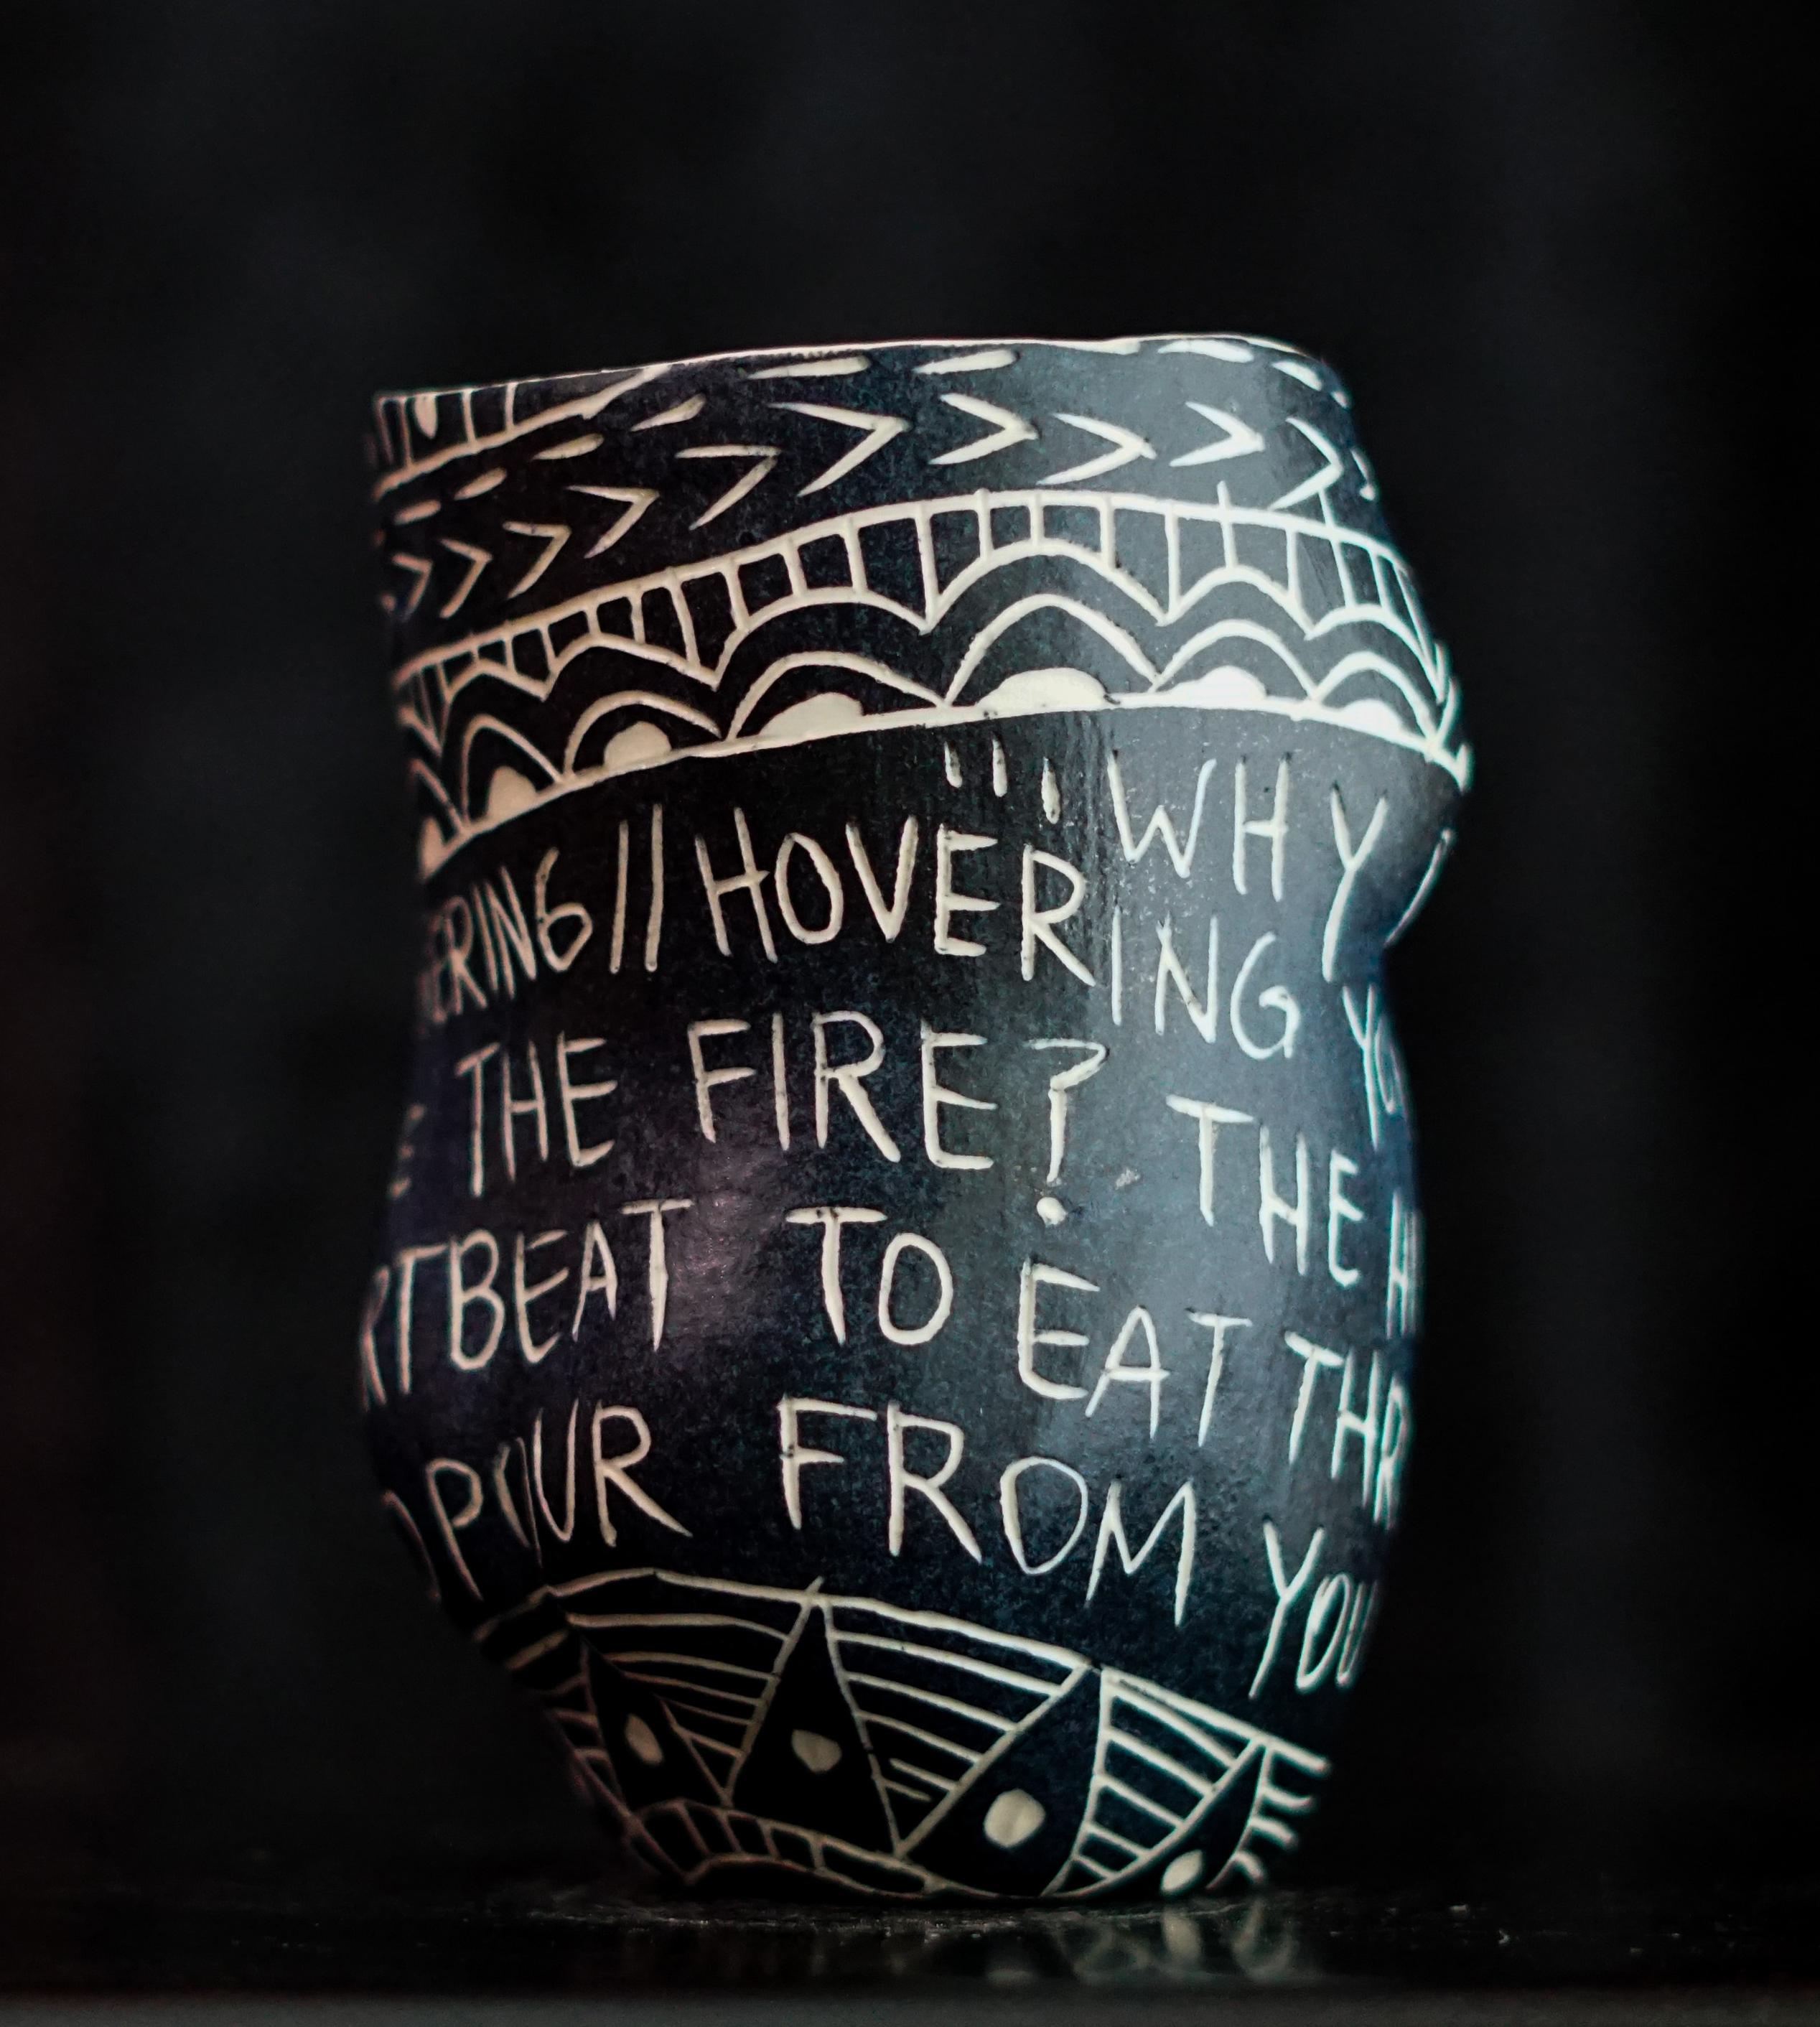 “Why Do You Insist on Shattering...” 2019
From the series Fragments of Our Love Story
Porcelain cup with sgraffito detailing
5 x 3 x 3 inches.

“Why do you insist on shattering...” Why do you insist on shattering//hovering your boiling blood
over